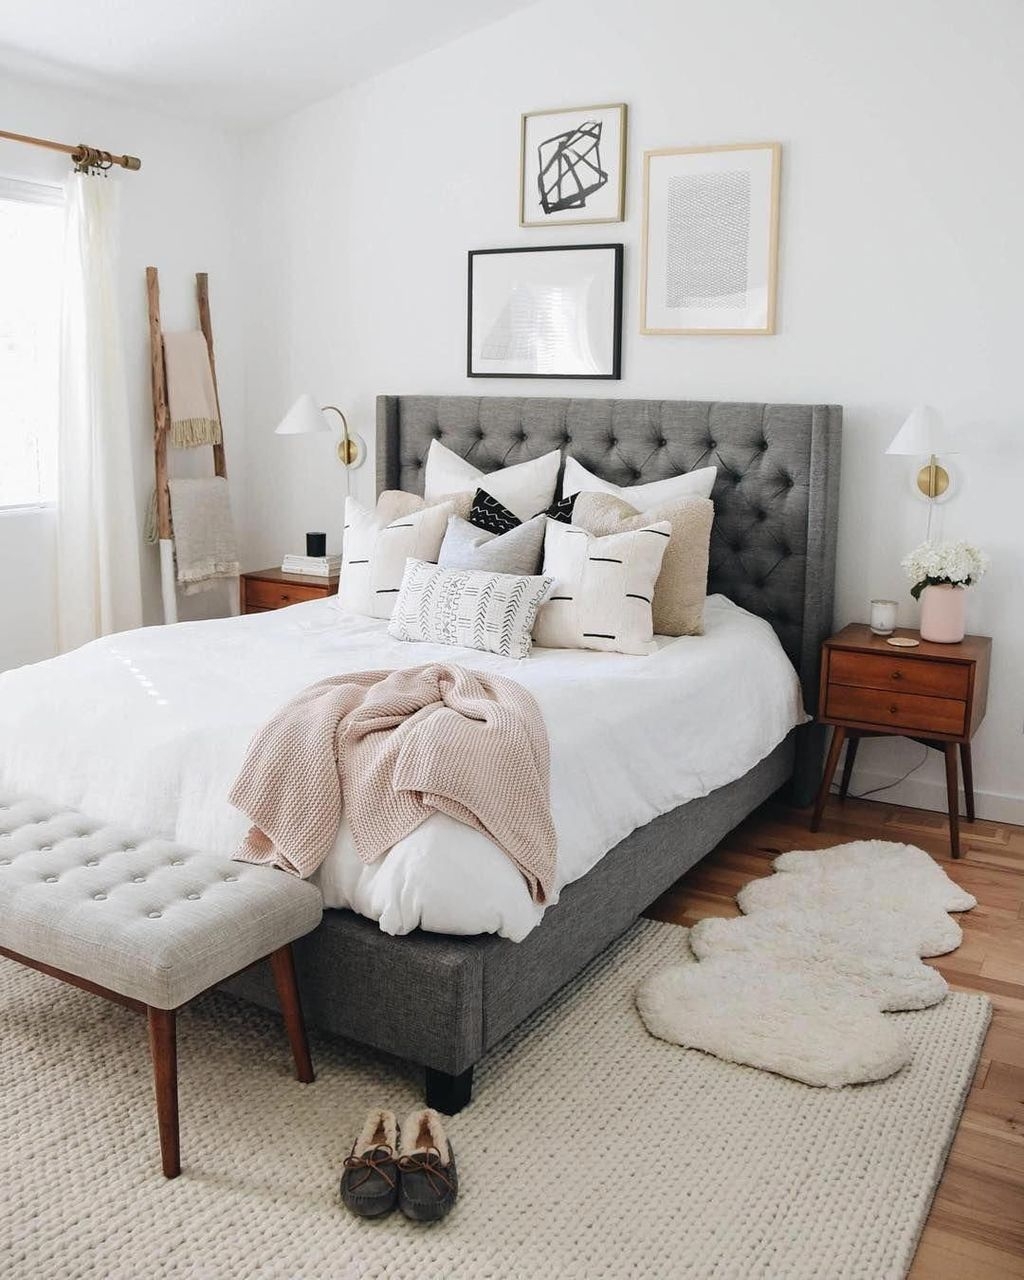 Affordable Rug Bedroom Decor Ideas To Try Right Now 49